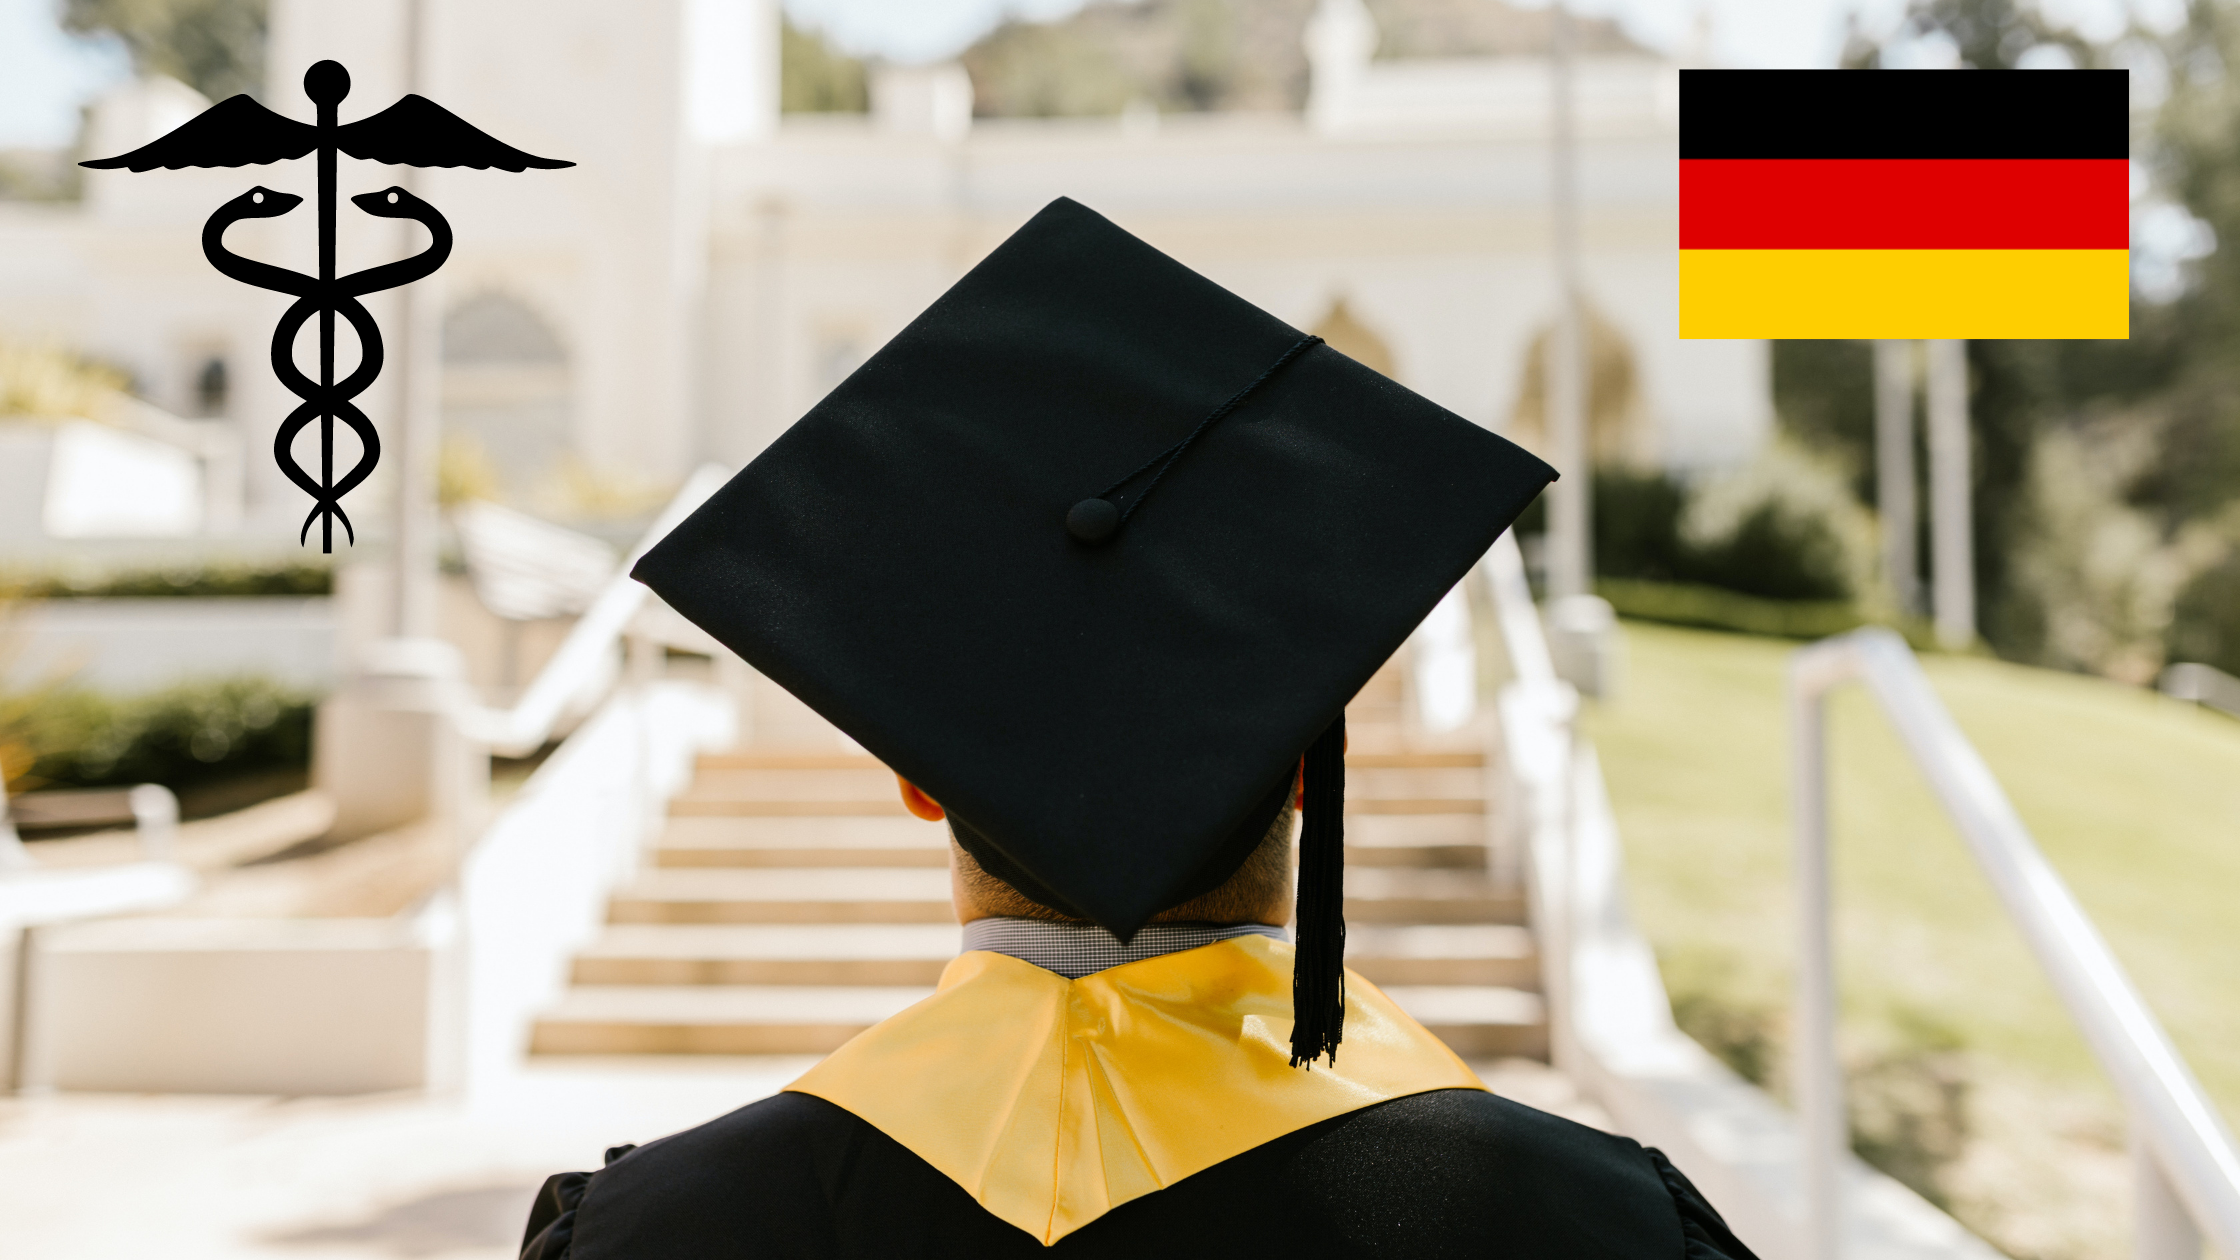 A medical graduate looking at the University he studied at with a German flag on the right side and a medical symbol on the left side